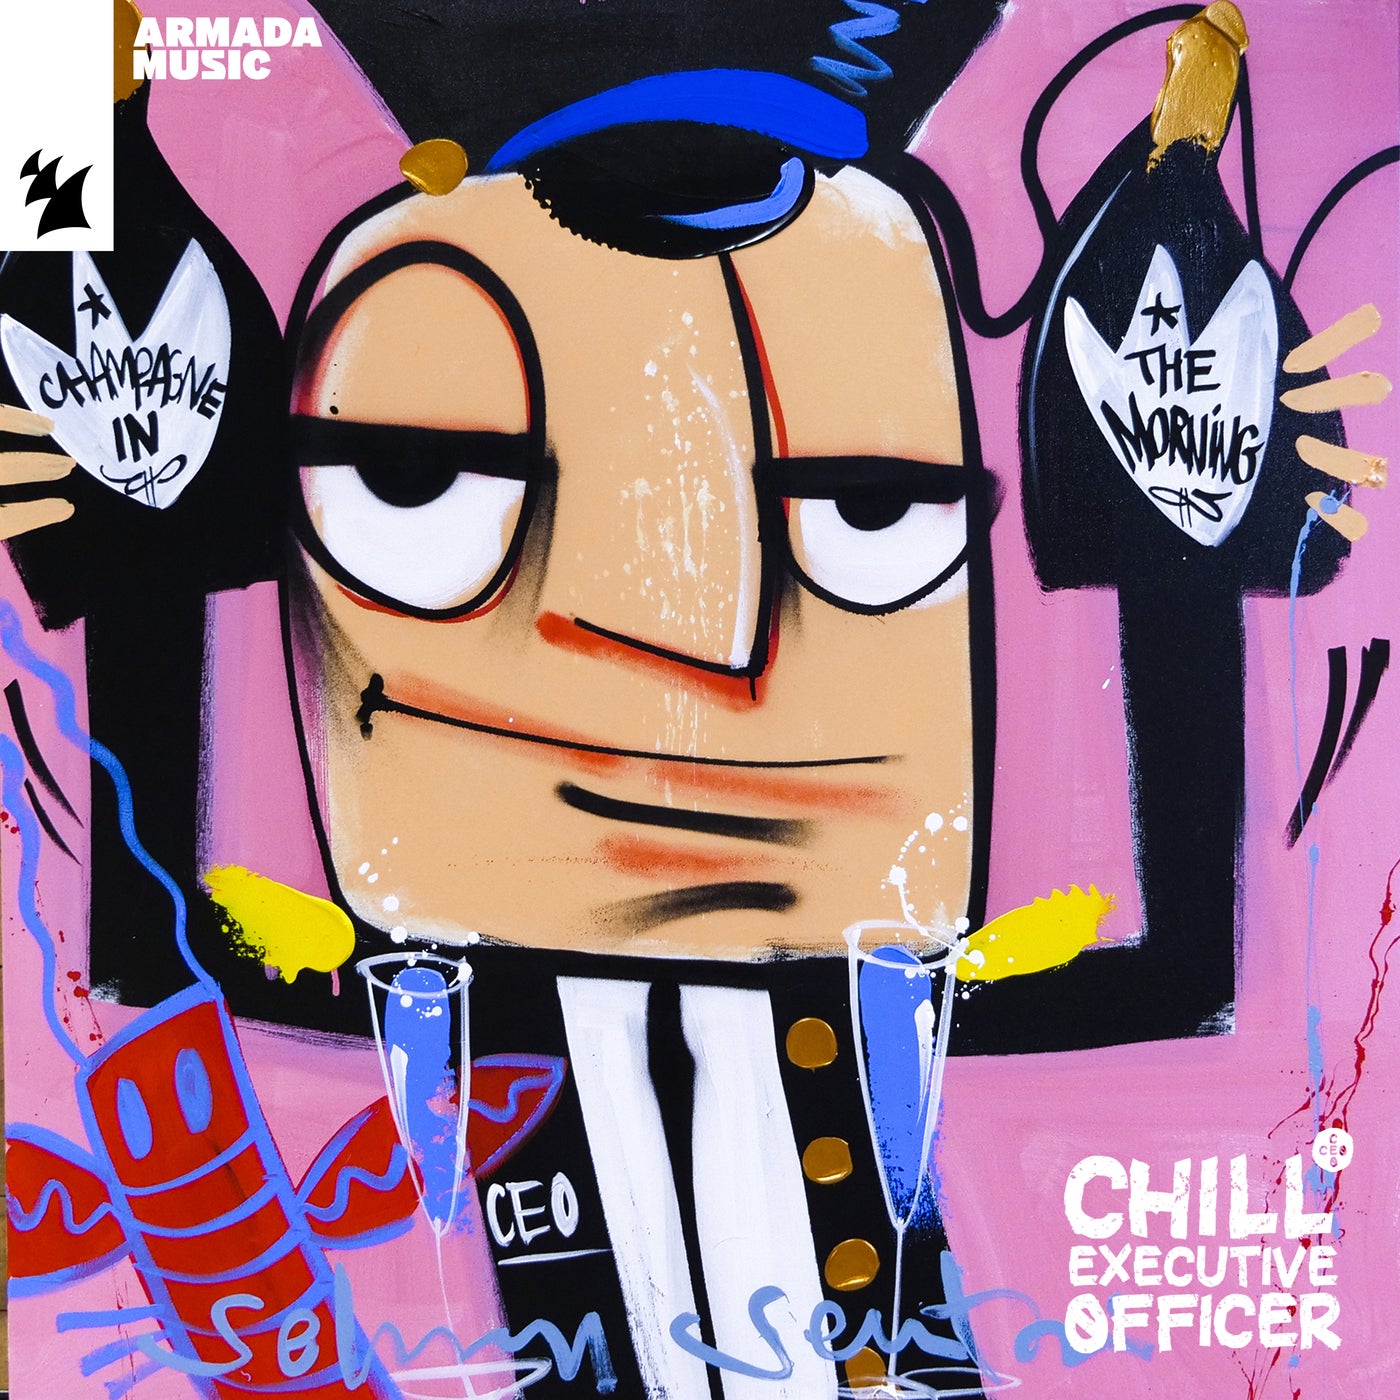 Chill Executive Officer (CEO), Vol. 30 [Selected by Maykel Piron] - Extended Versions